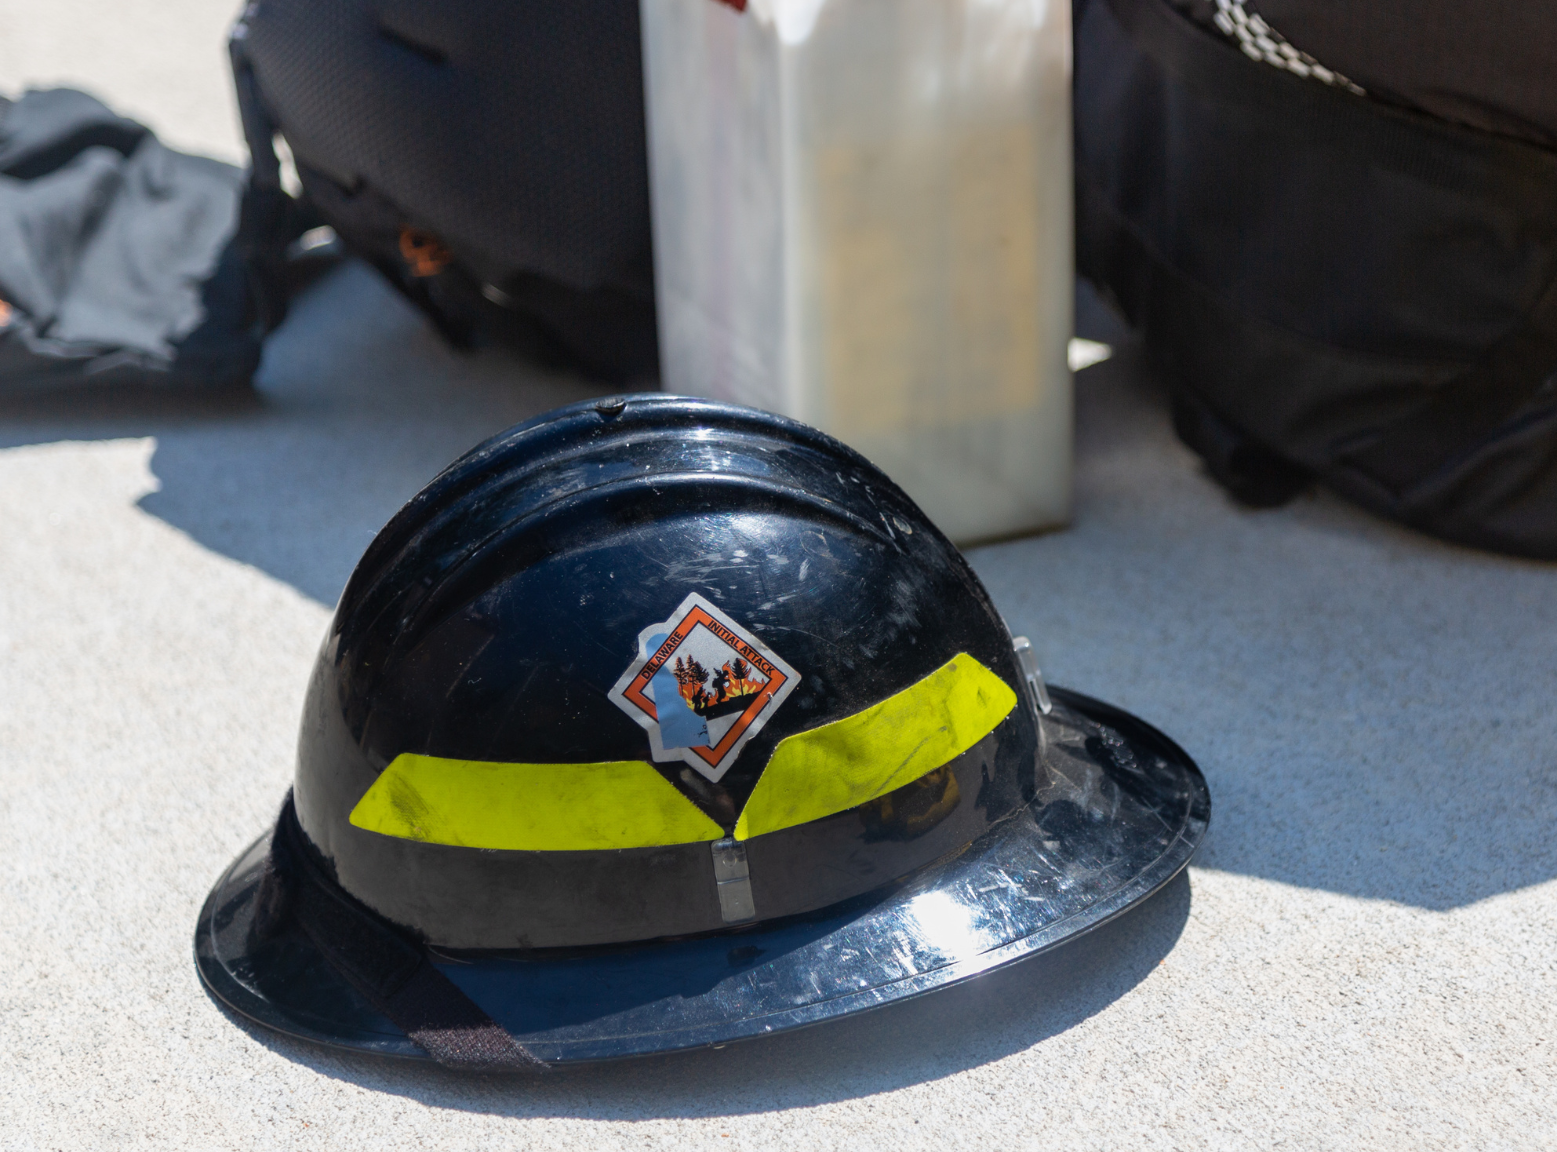 Delaware's black wildland firefighter helmet with yellow tape and wildfire logo